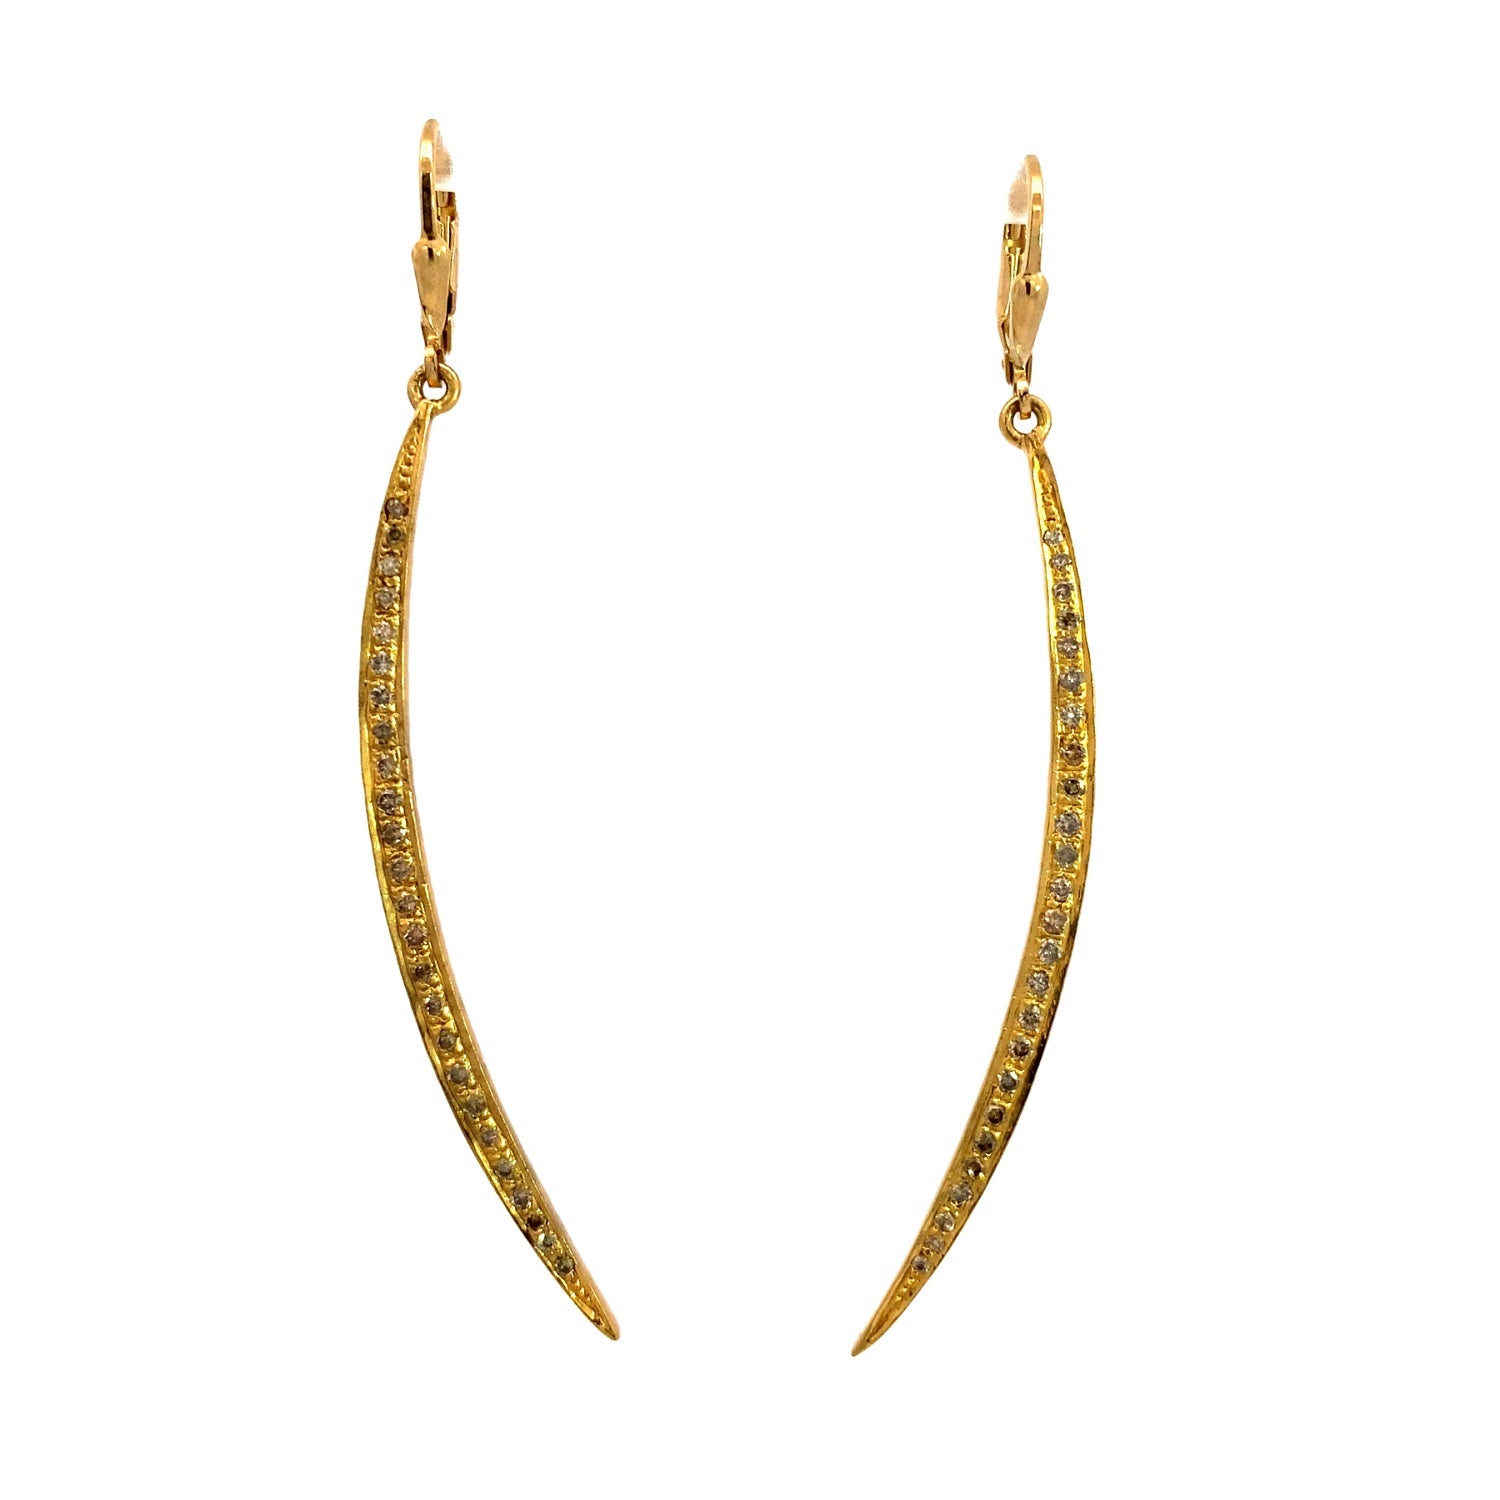 Crescent Earrings with Champagne Diamonds, 18k Vermeil